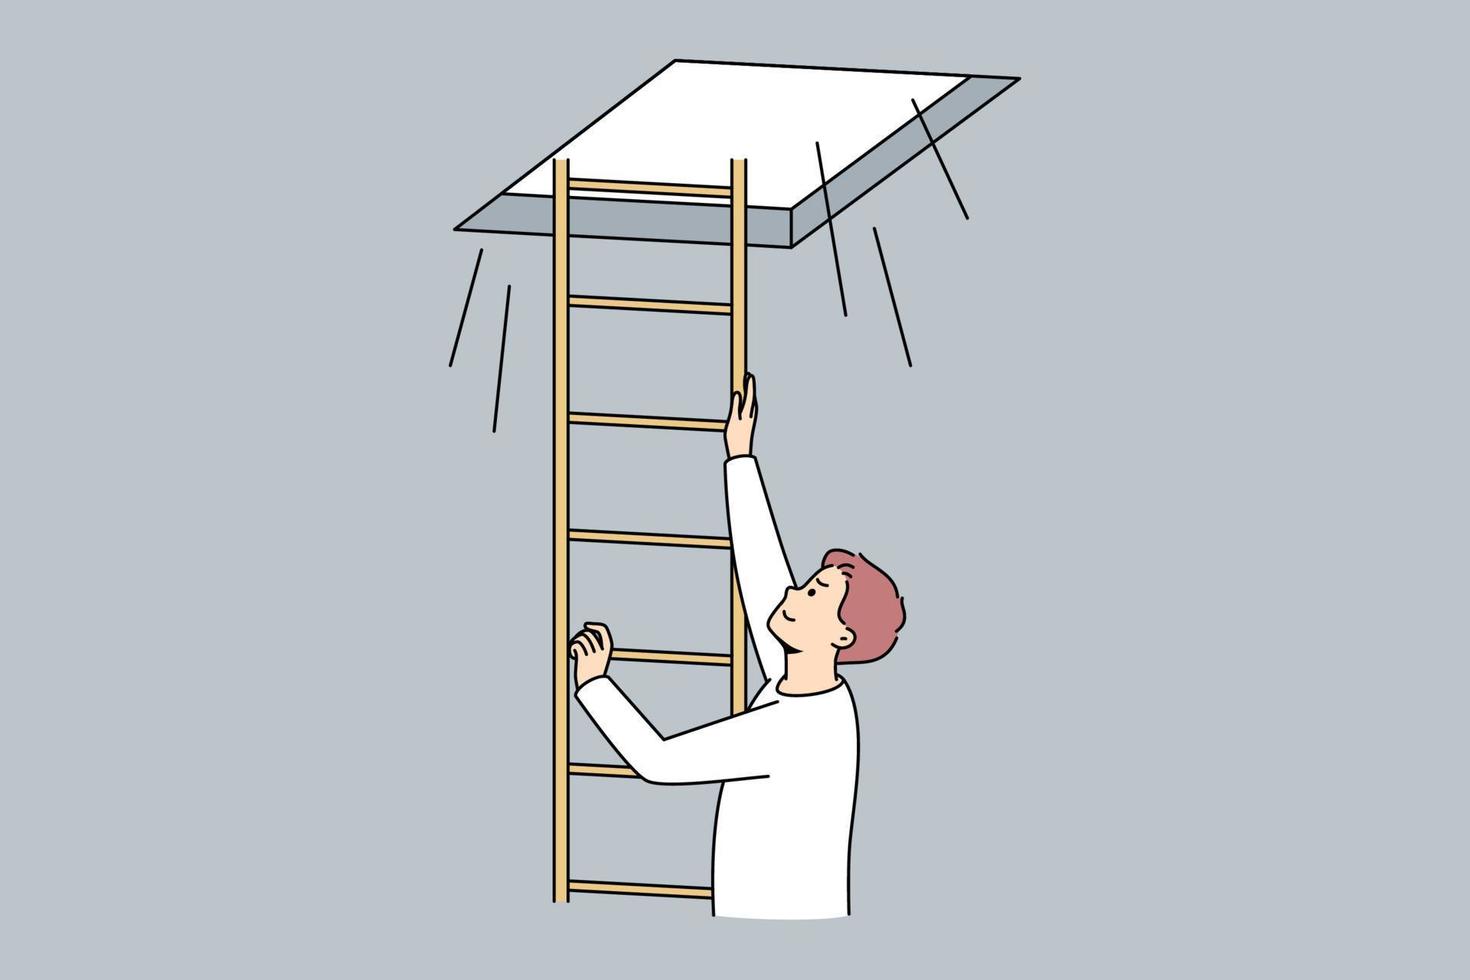 Man climbing up ladder to light. Smiling motivated male go up open new opportunities or perspectives. Bright future ahead. Vector illustration.